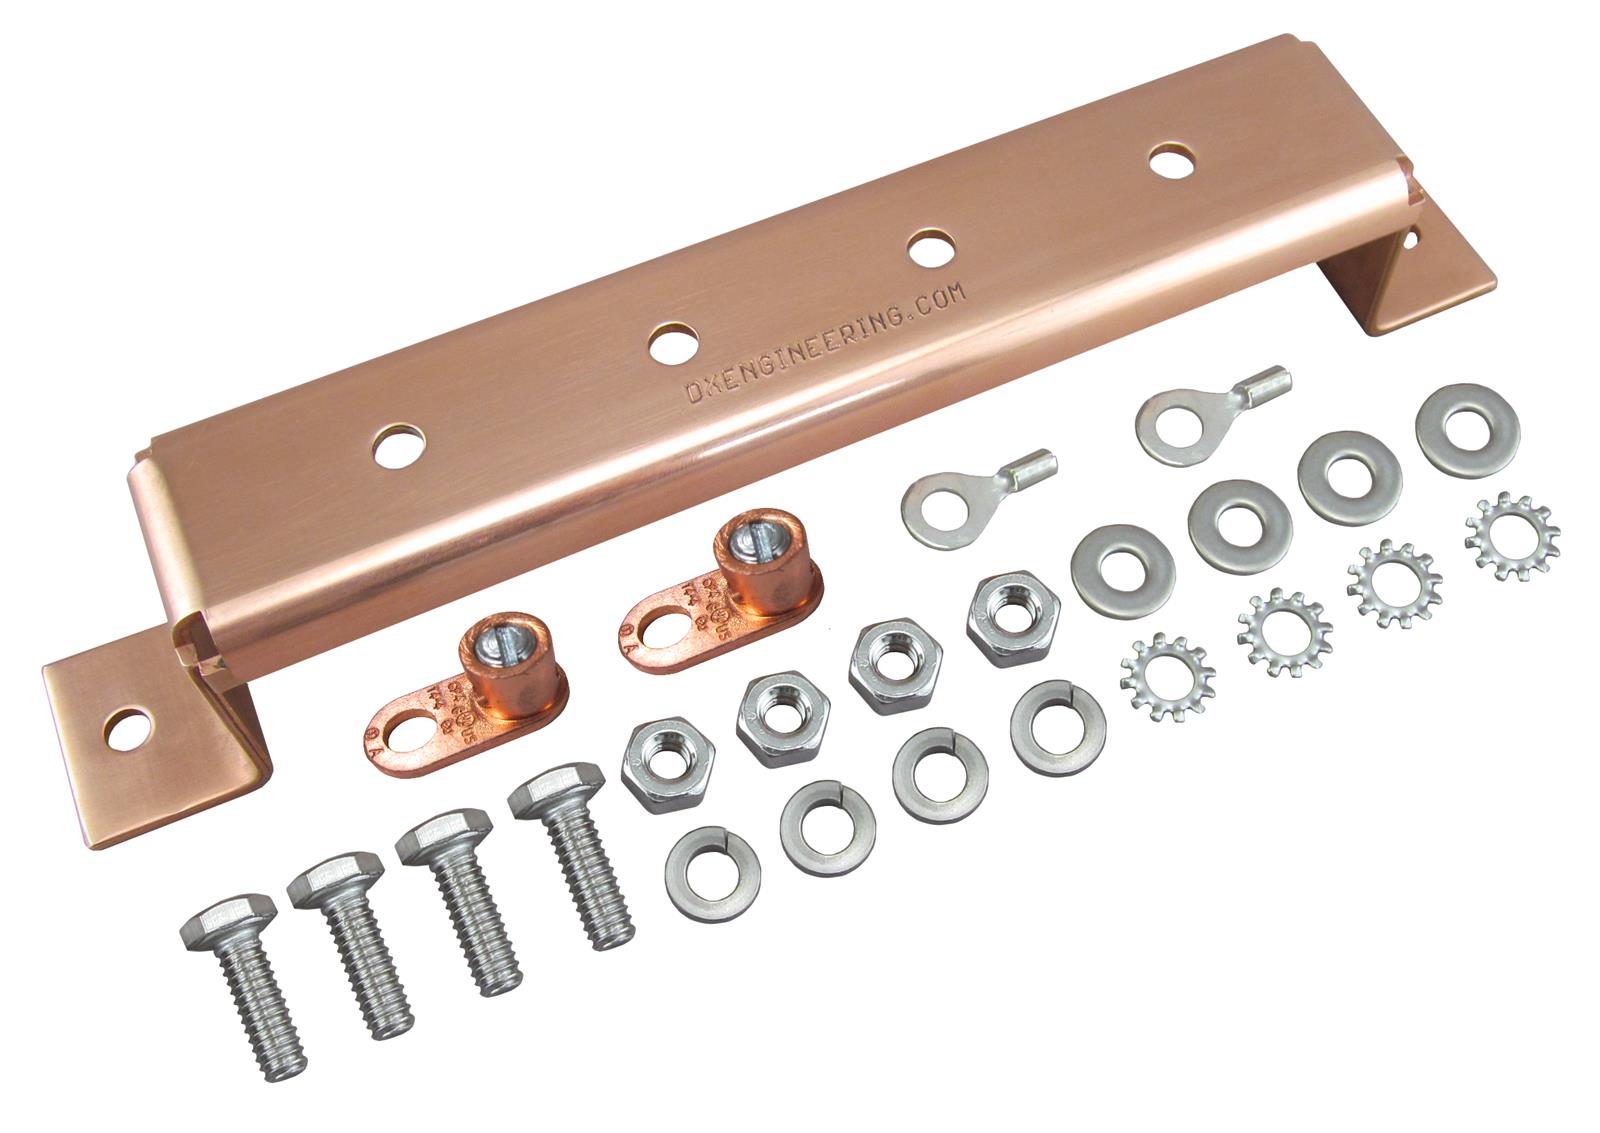 DX Engineering DXE-GBWM-W DX Engineering GBWM-W Copper Ground Bus Wall  Mounts | DX Engineering